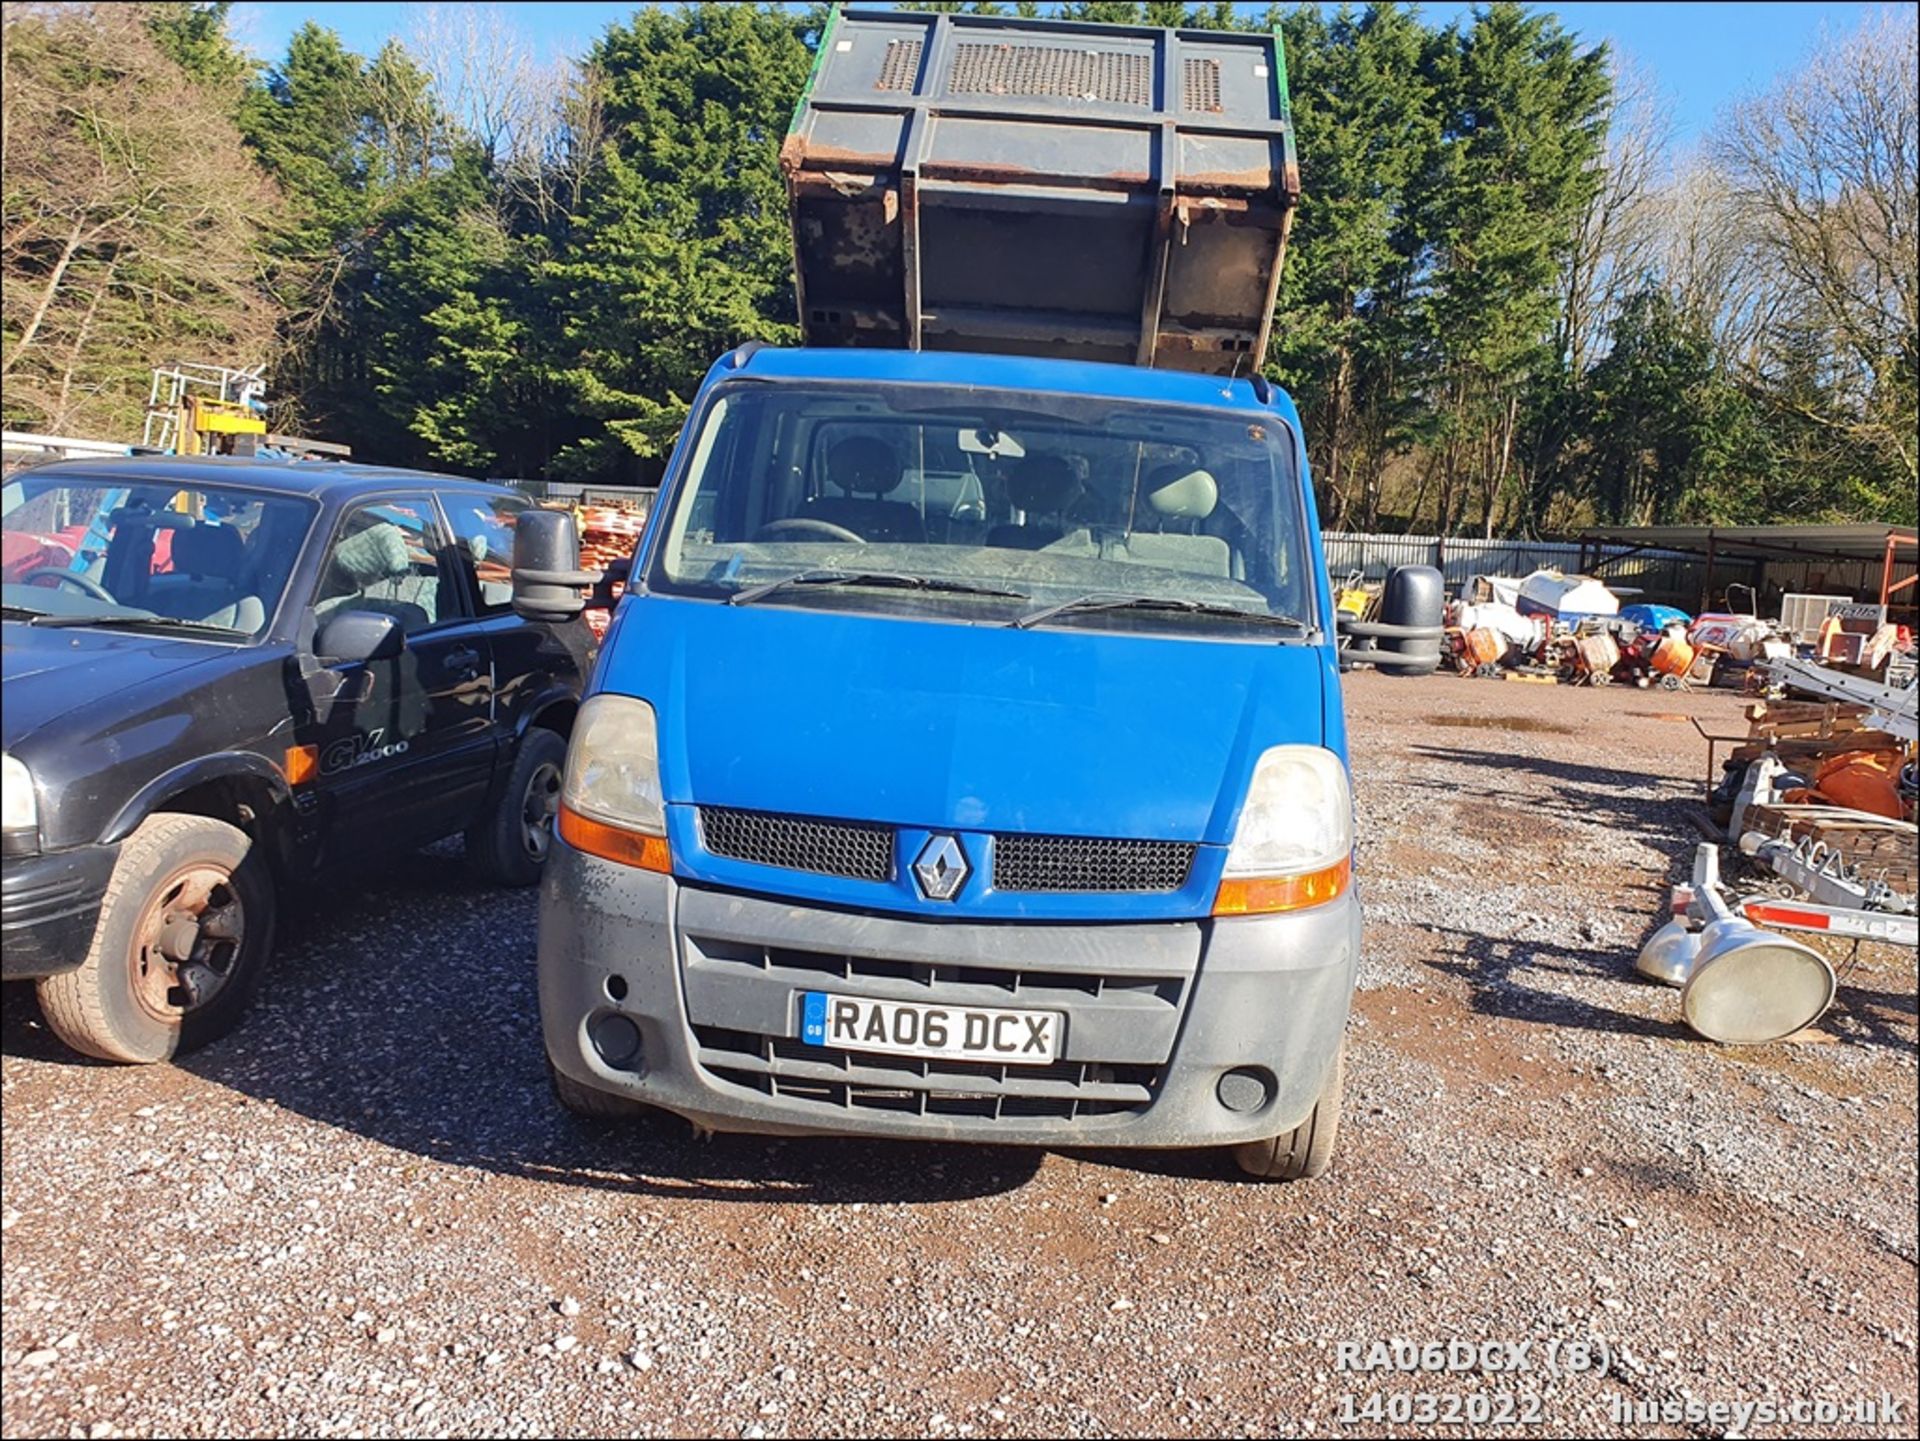 06/06 RENAULT MASTER CCML35 DCI 120 MWB - 2463cc 2dr Tipper (Grey) - Image 9 of 23